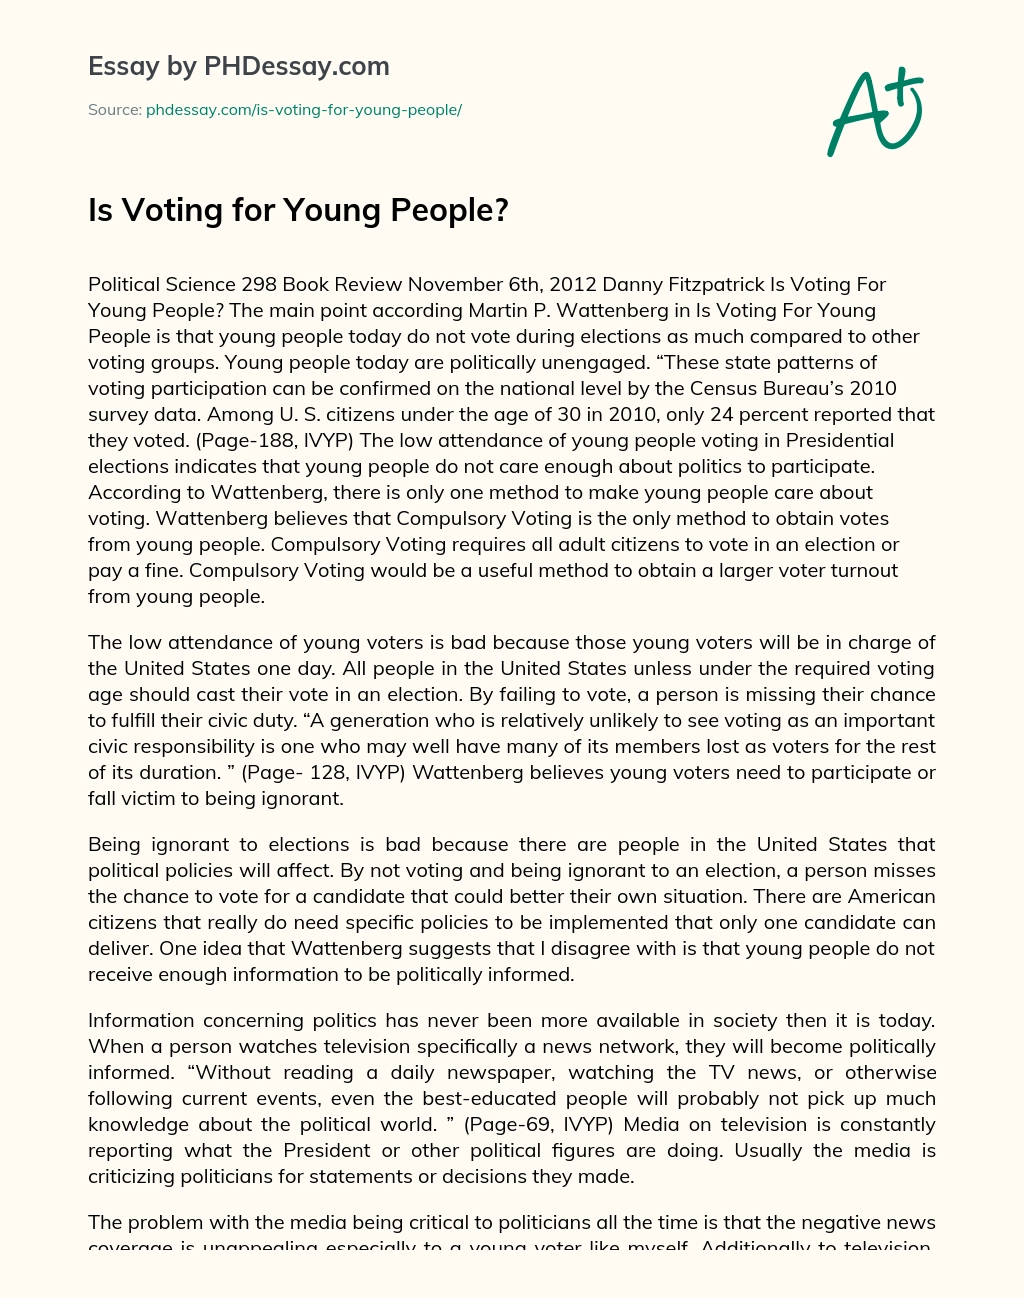 Is Voting for Young People? essay